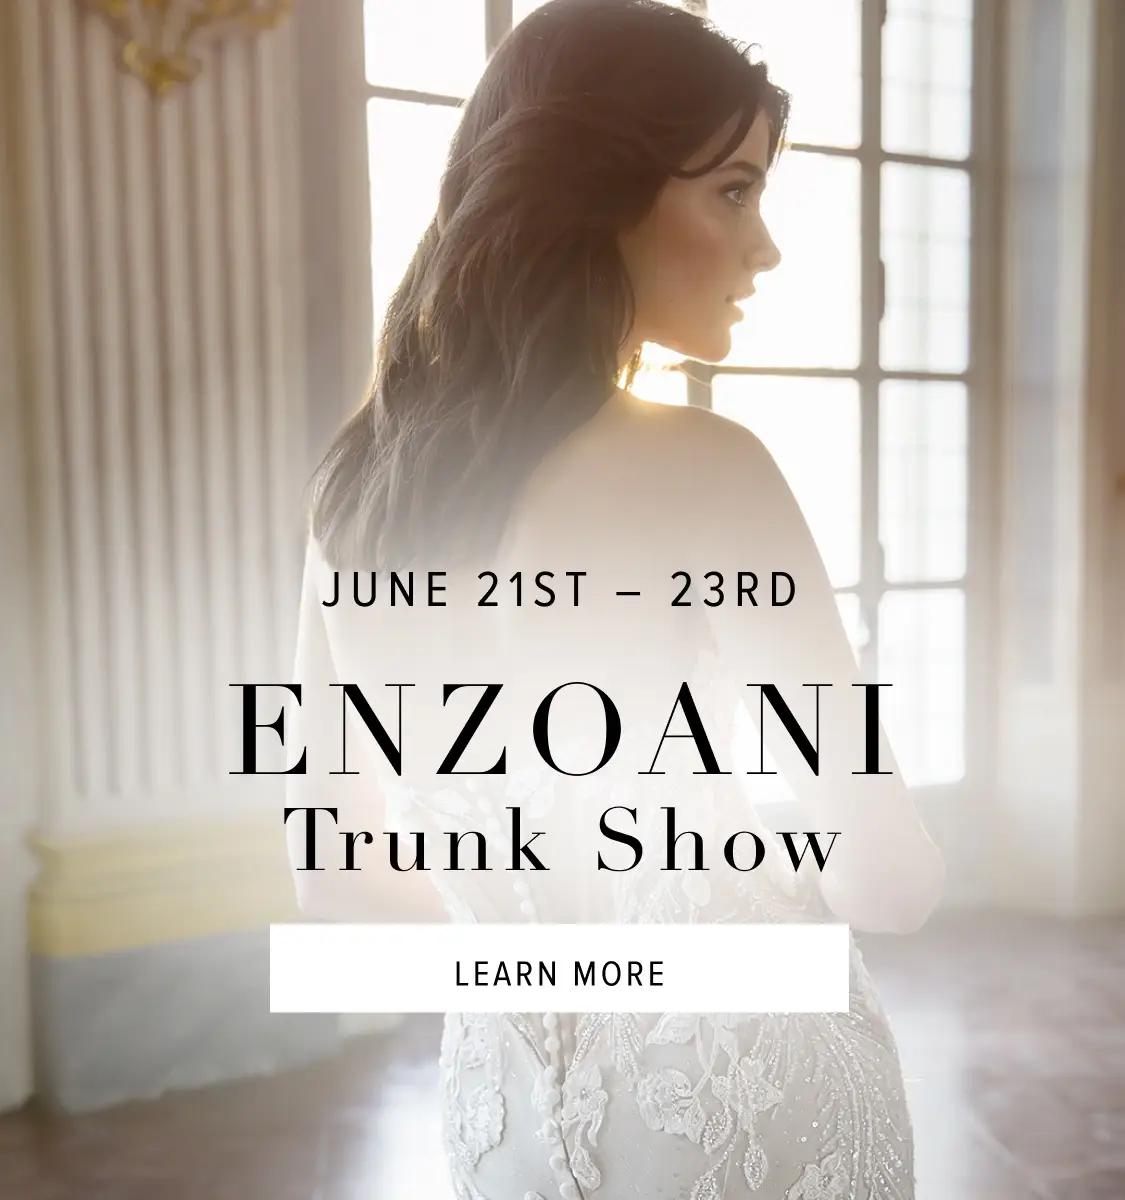 Enzoani trunk show mobile banner